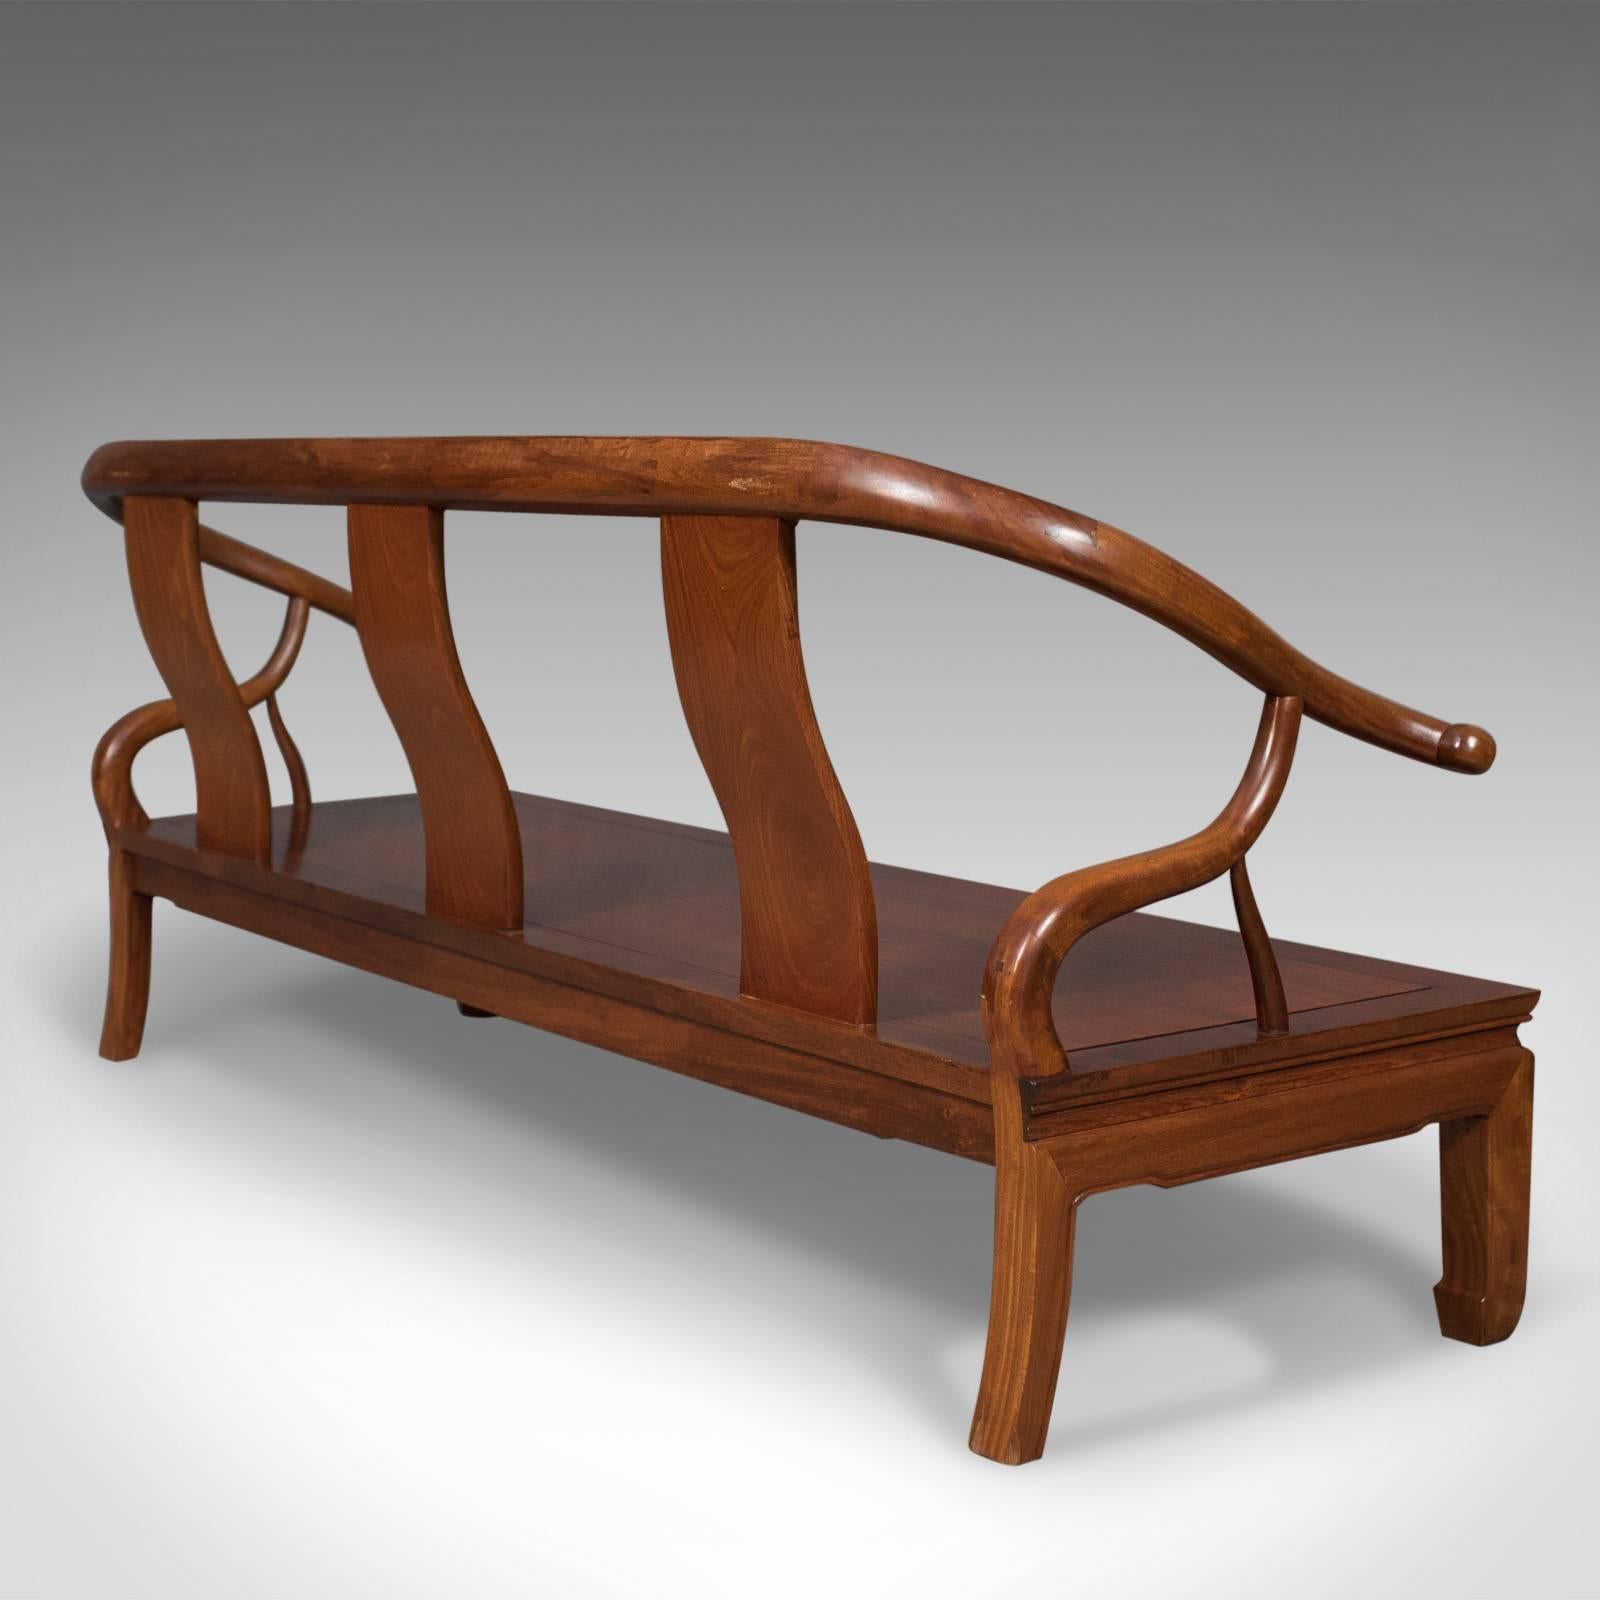 Chinese Rosewood Three-Seat Bench in Traditional Form, Late 20th Century 1